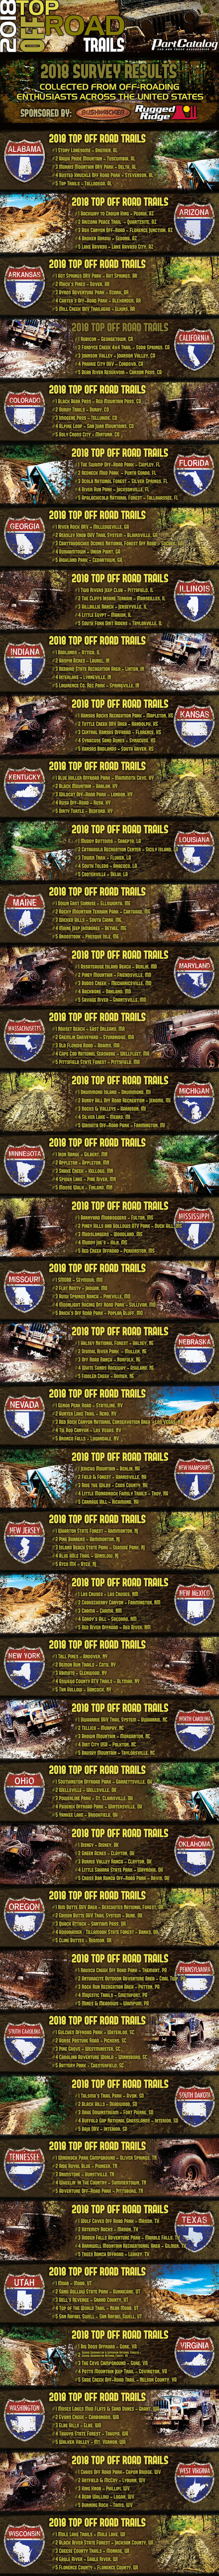 2018 Top Off Road Trails in America v3